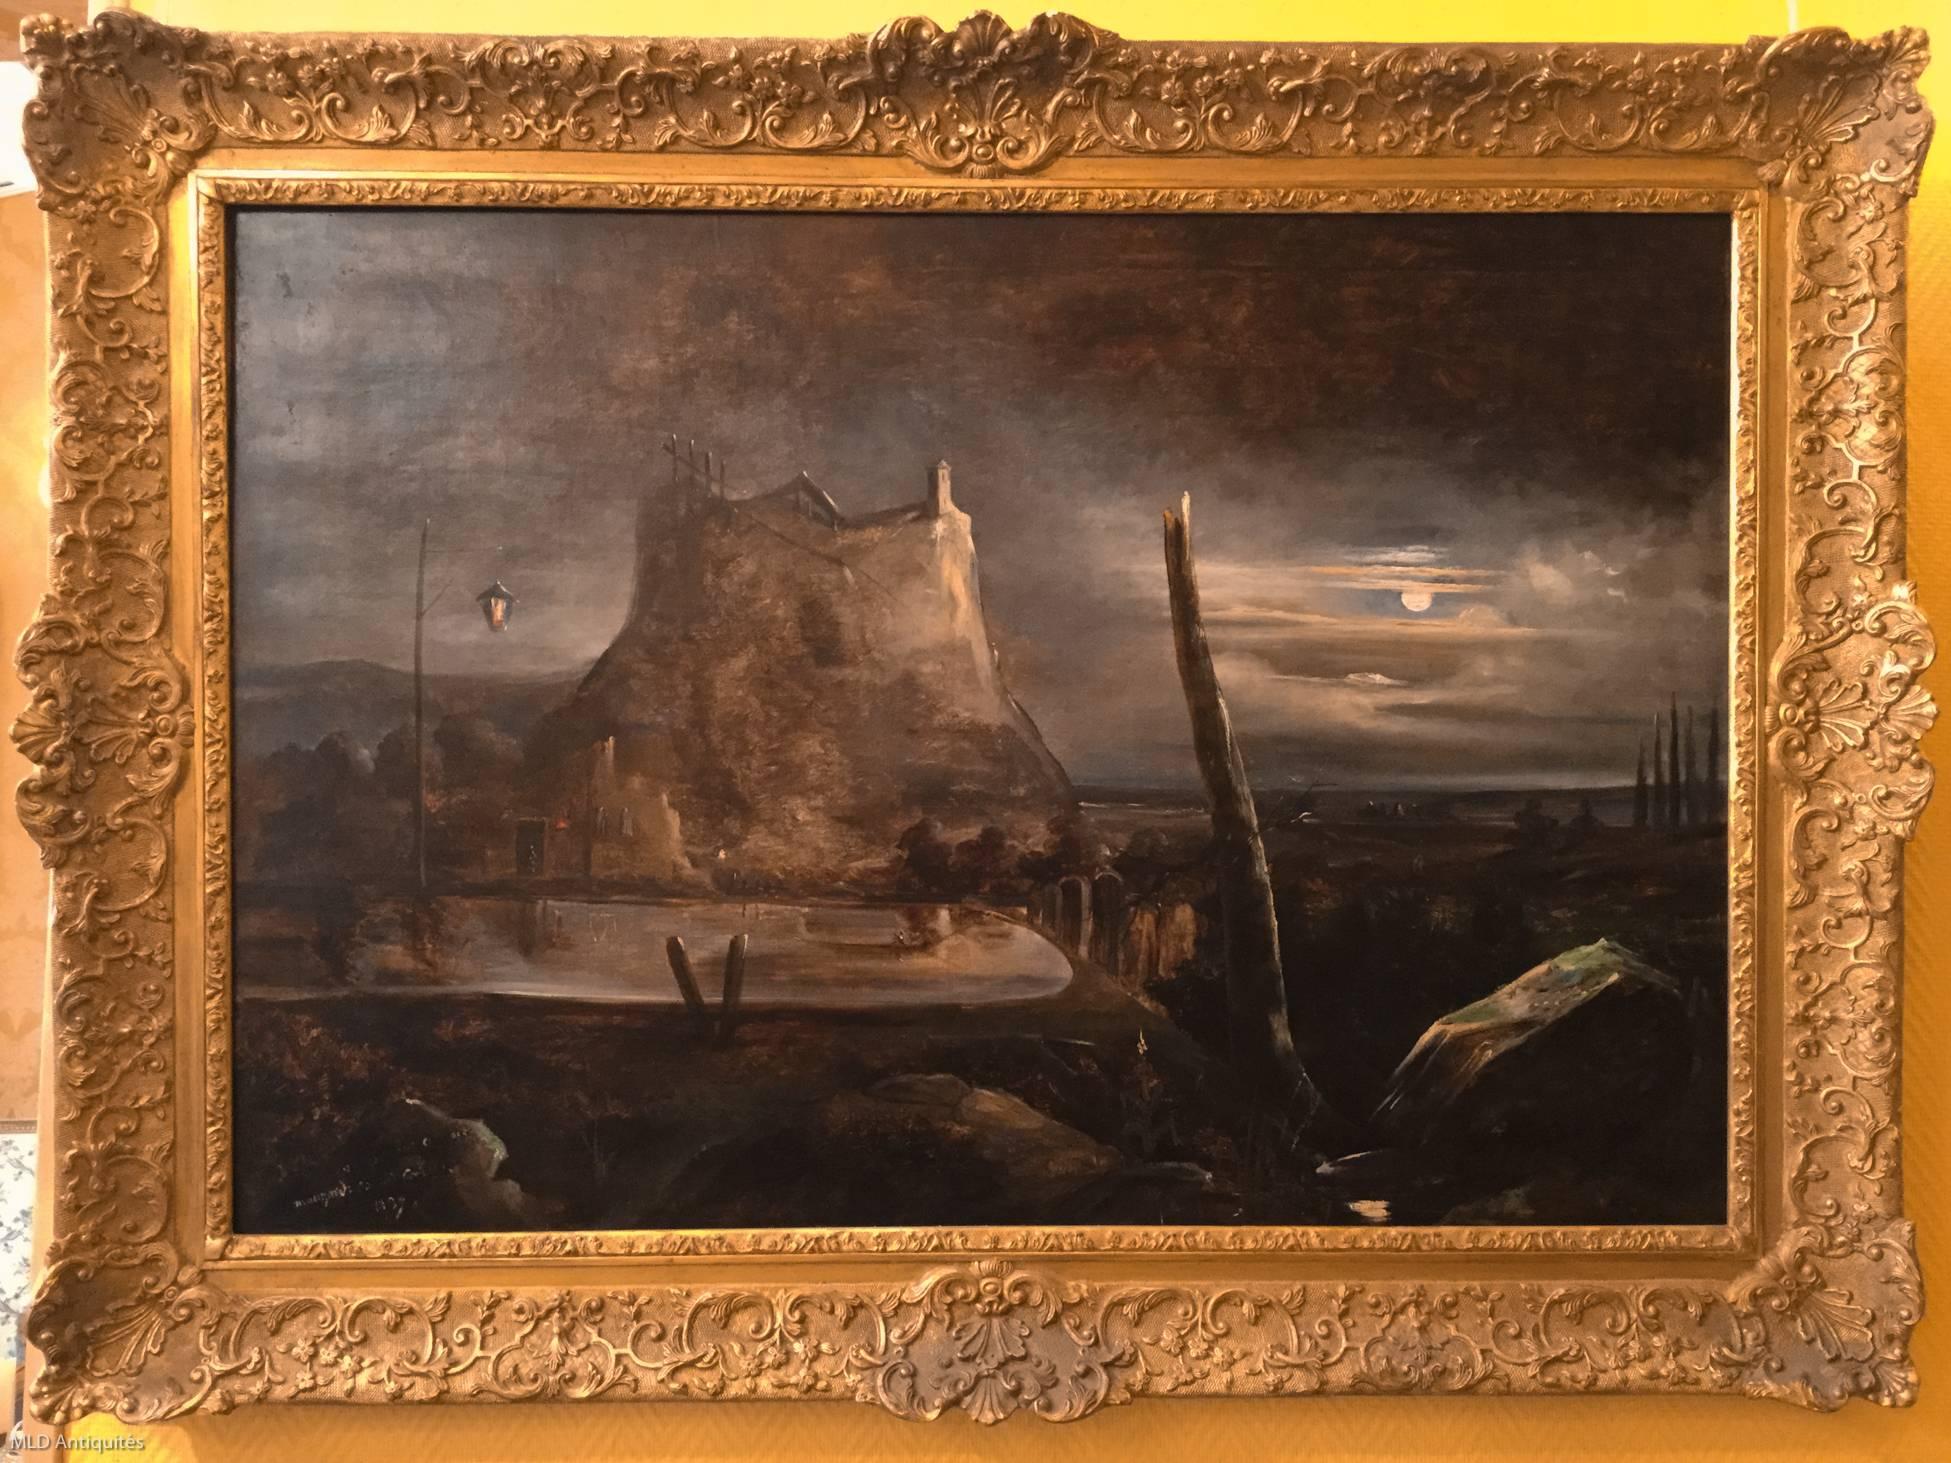 Amazing and ornamental large oil on canvas depicting "An imaginary night-landscape".
Surprising way of the artist to organize his mind. We see scenes in other scenes, a French patriotic or revolutionary lantern, boat on a lake at the top